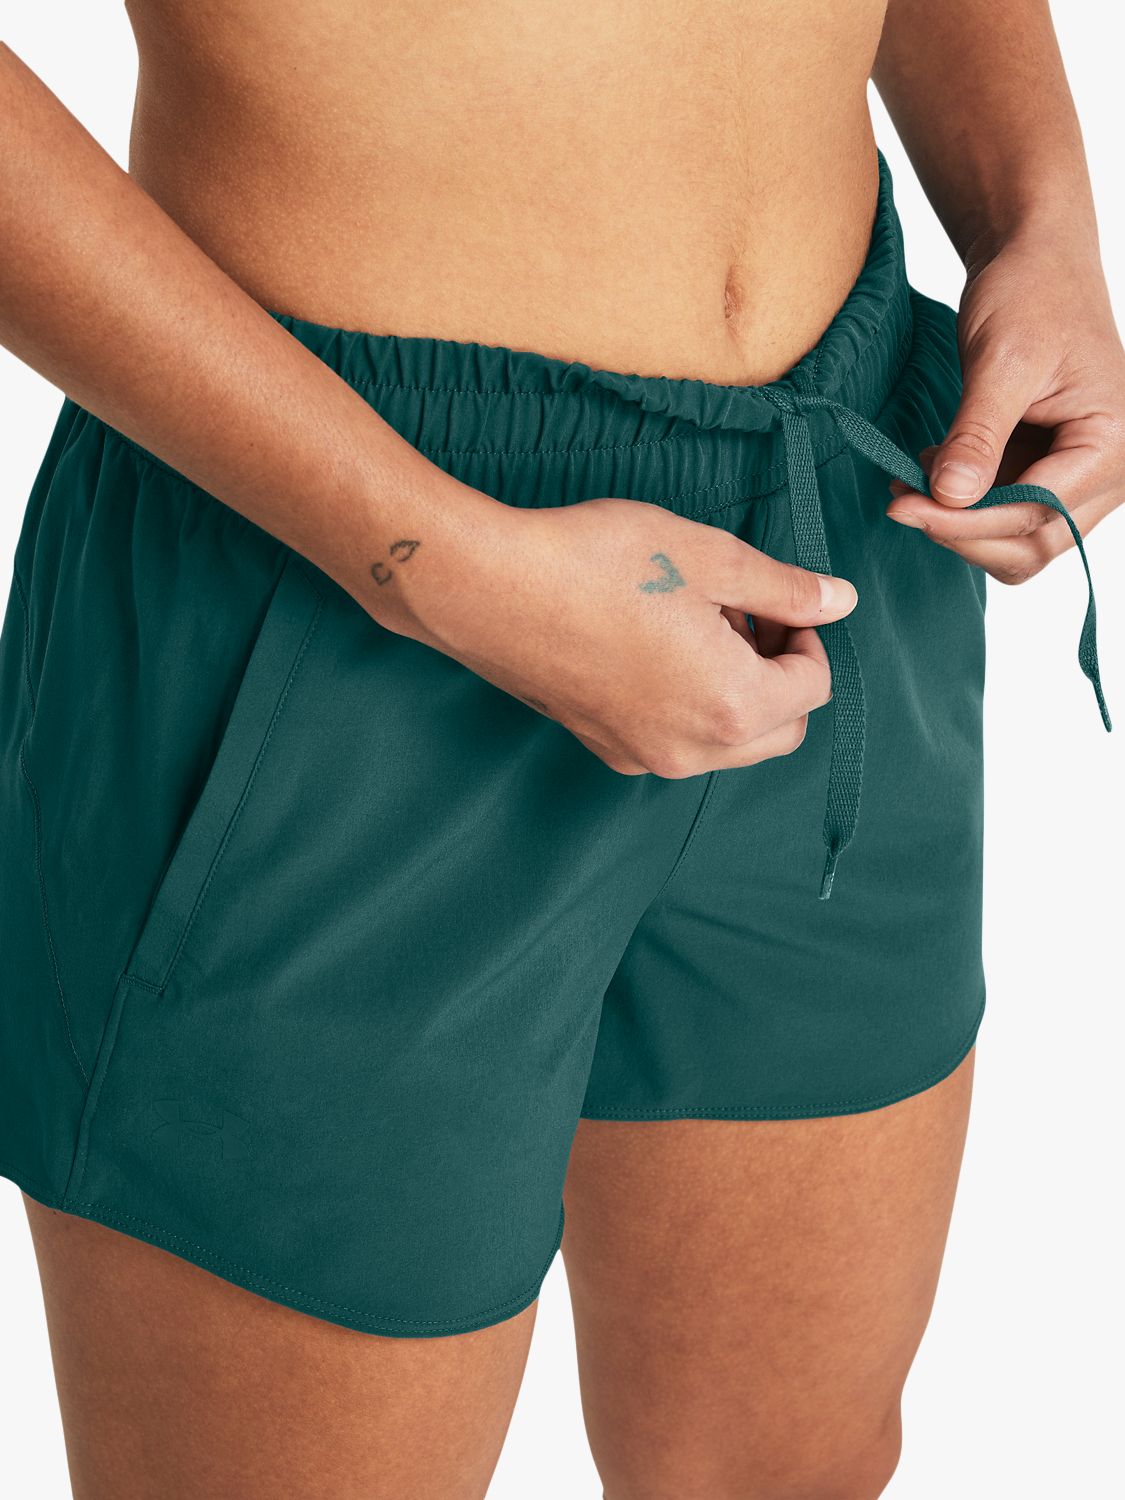 Under Armour Flex Woven 3" Running Shorts, Hydro Teal, S